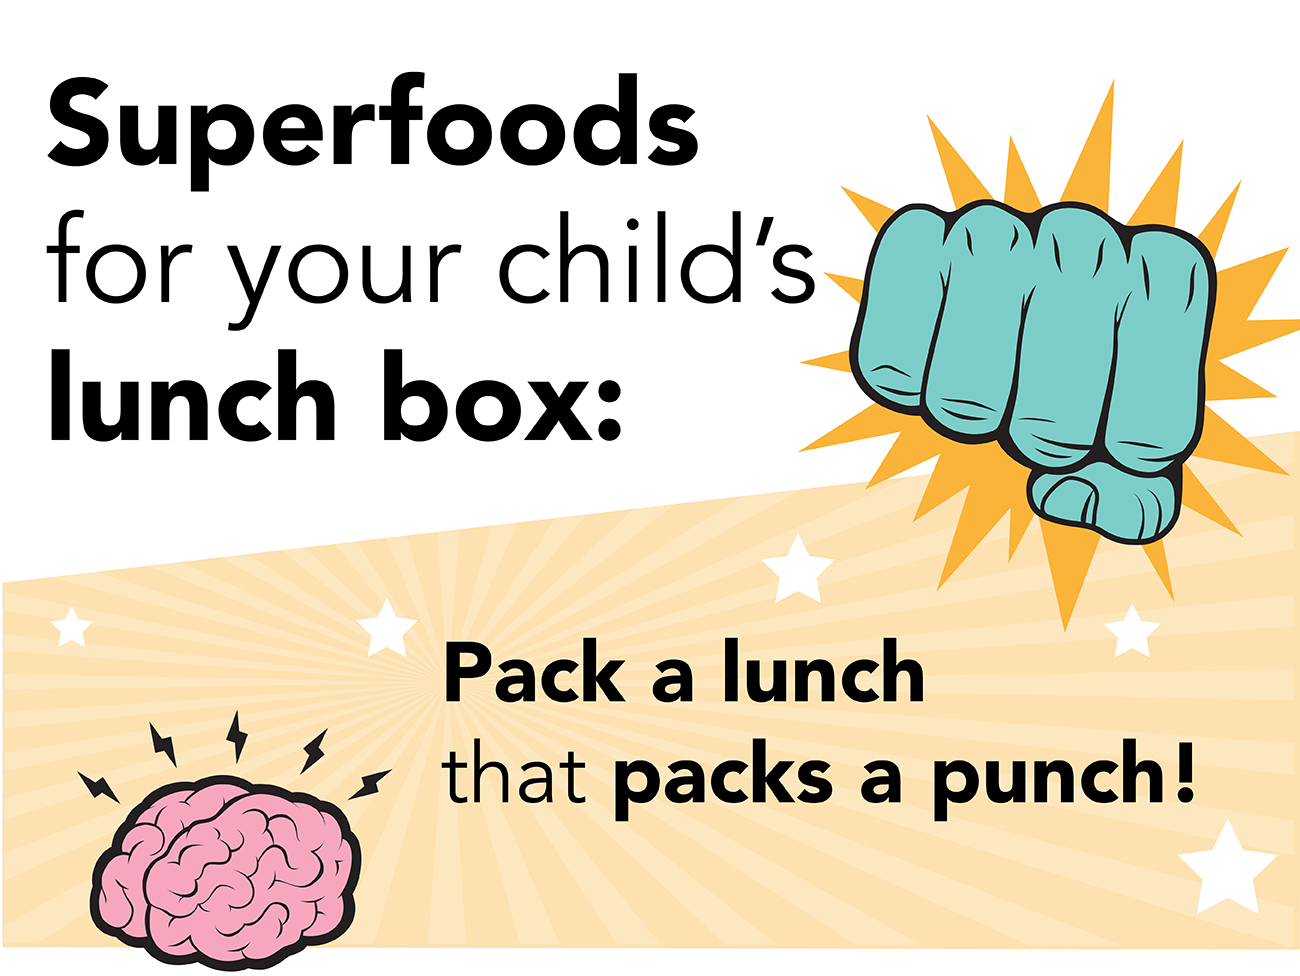 graphic with a drawing of a punching fist and the words 'Superfoods for your child's lunch box: Pack a lunch that packs a punch!' 